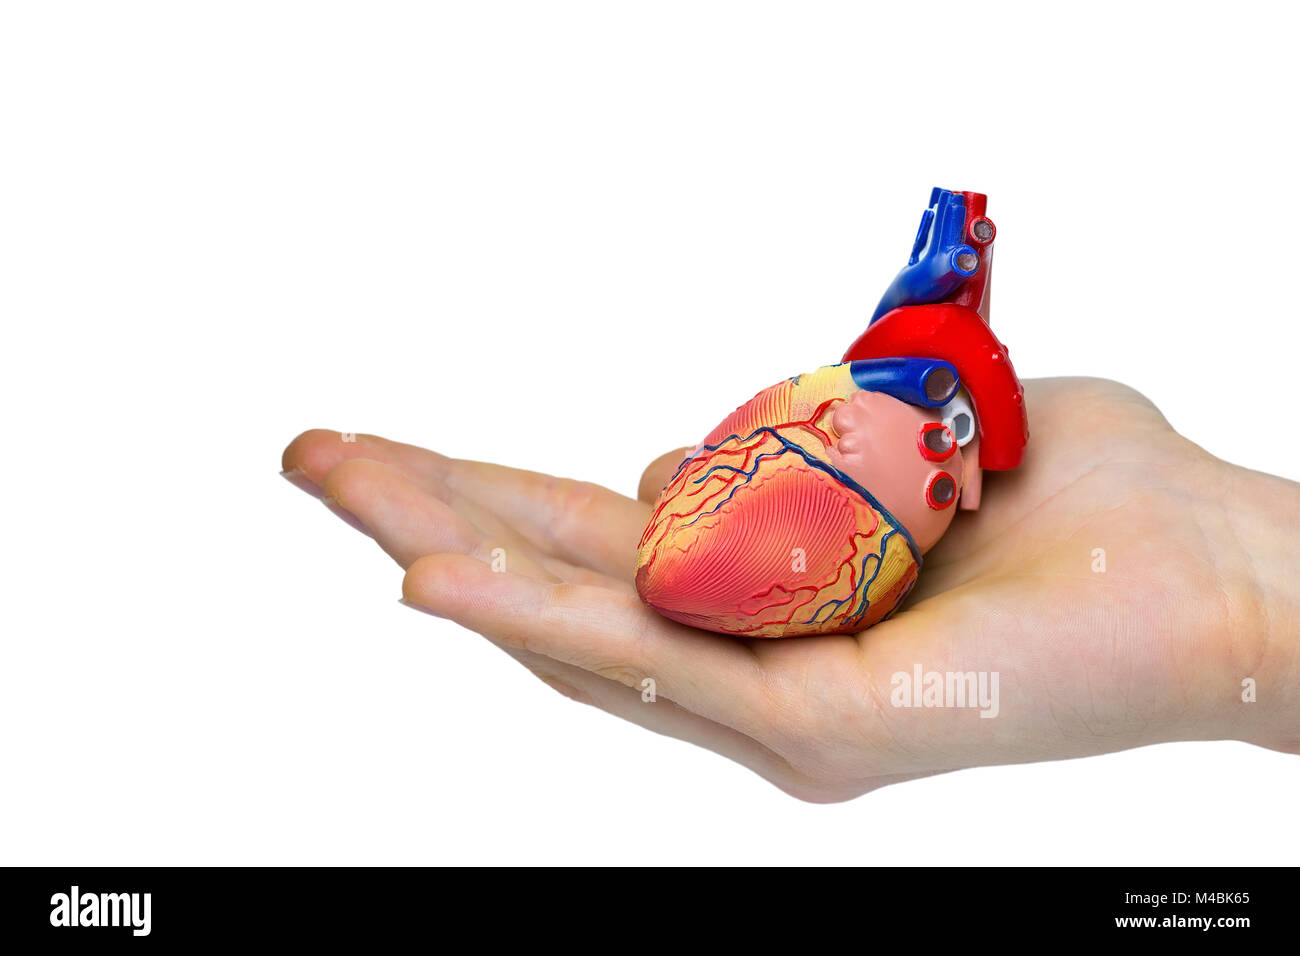 Artificial human heart model on hand Stock Photo